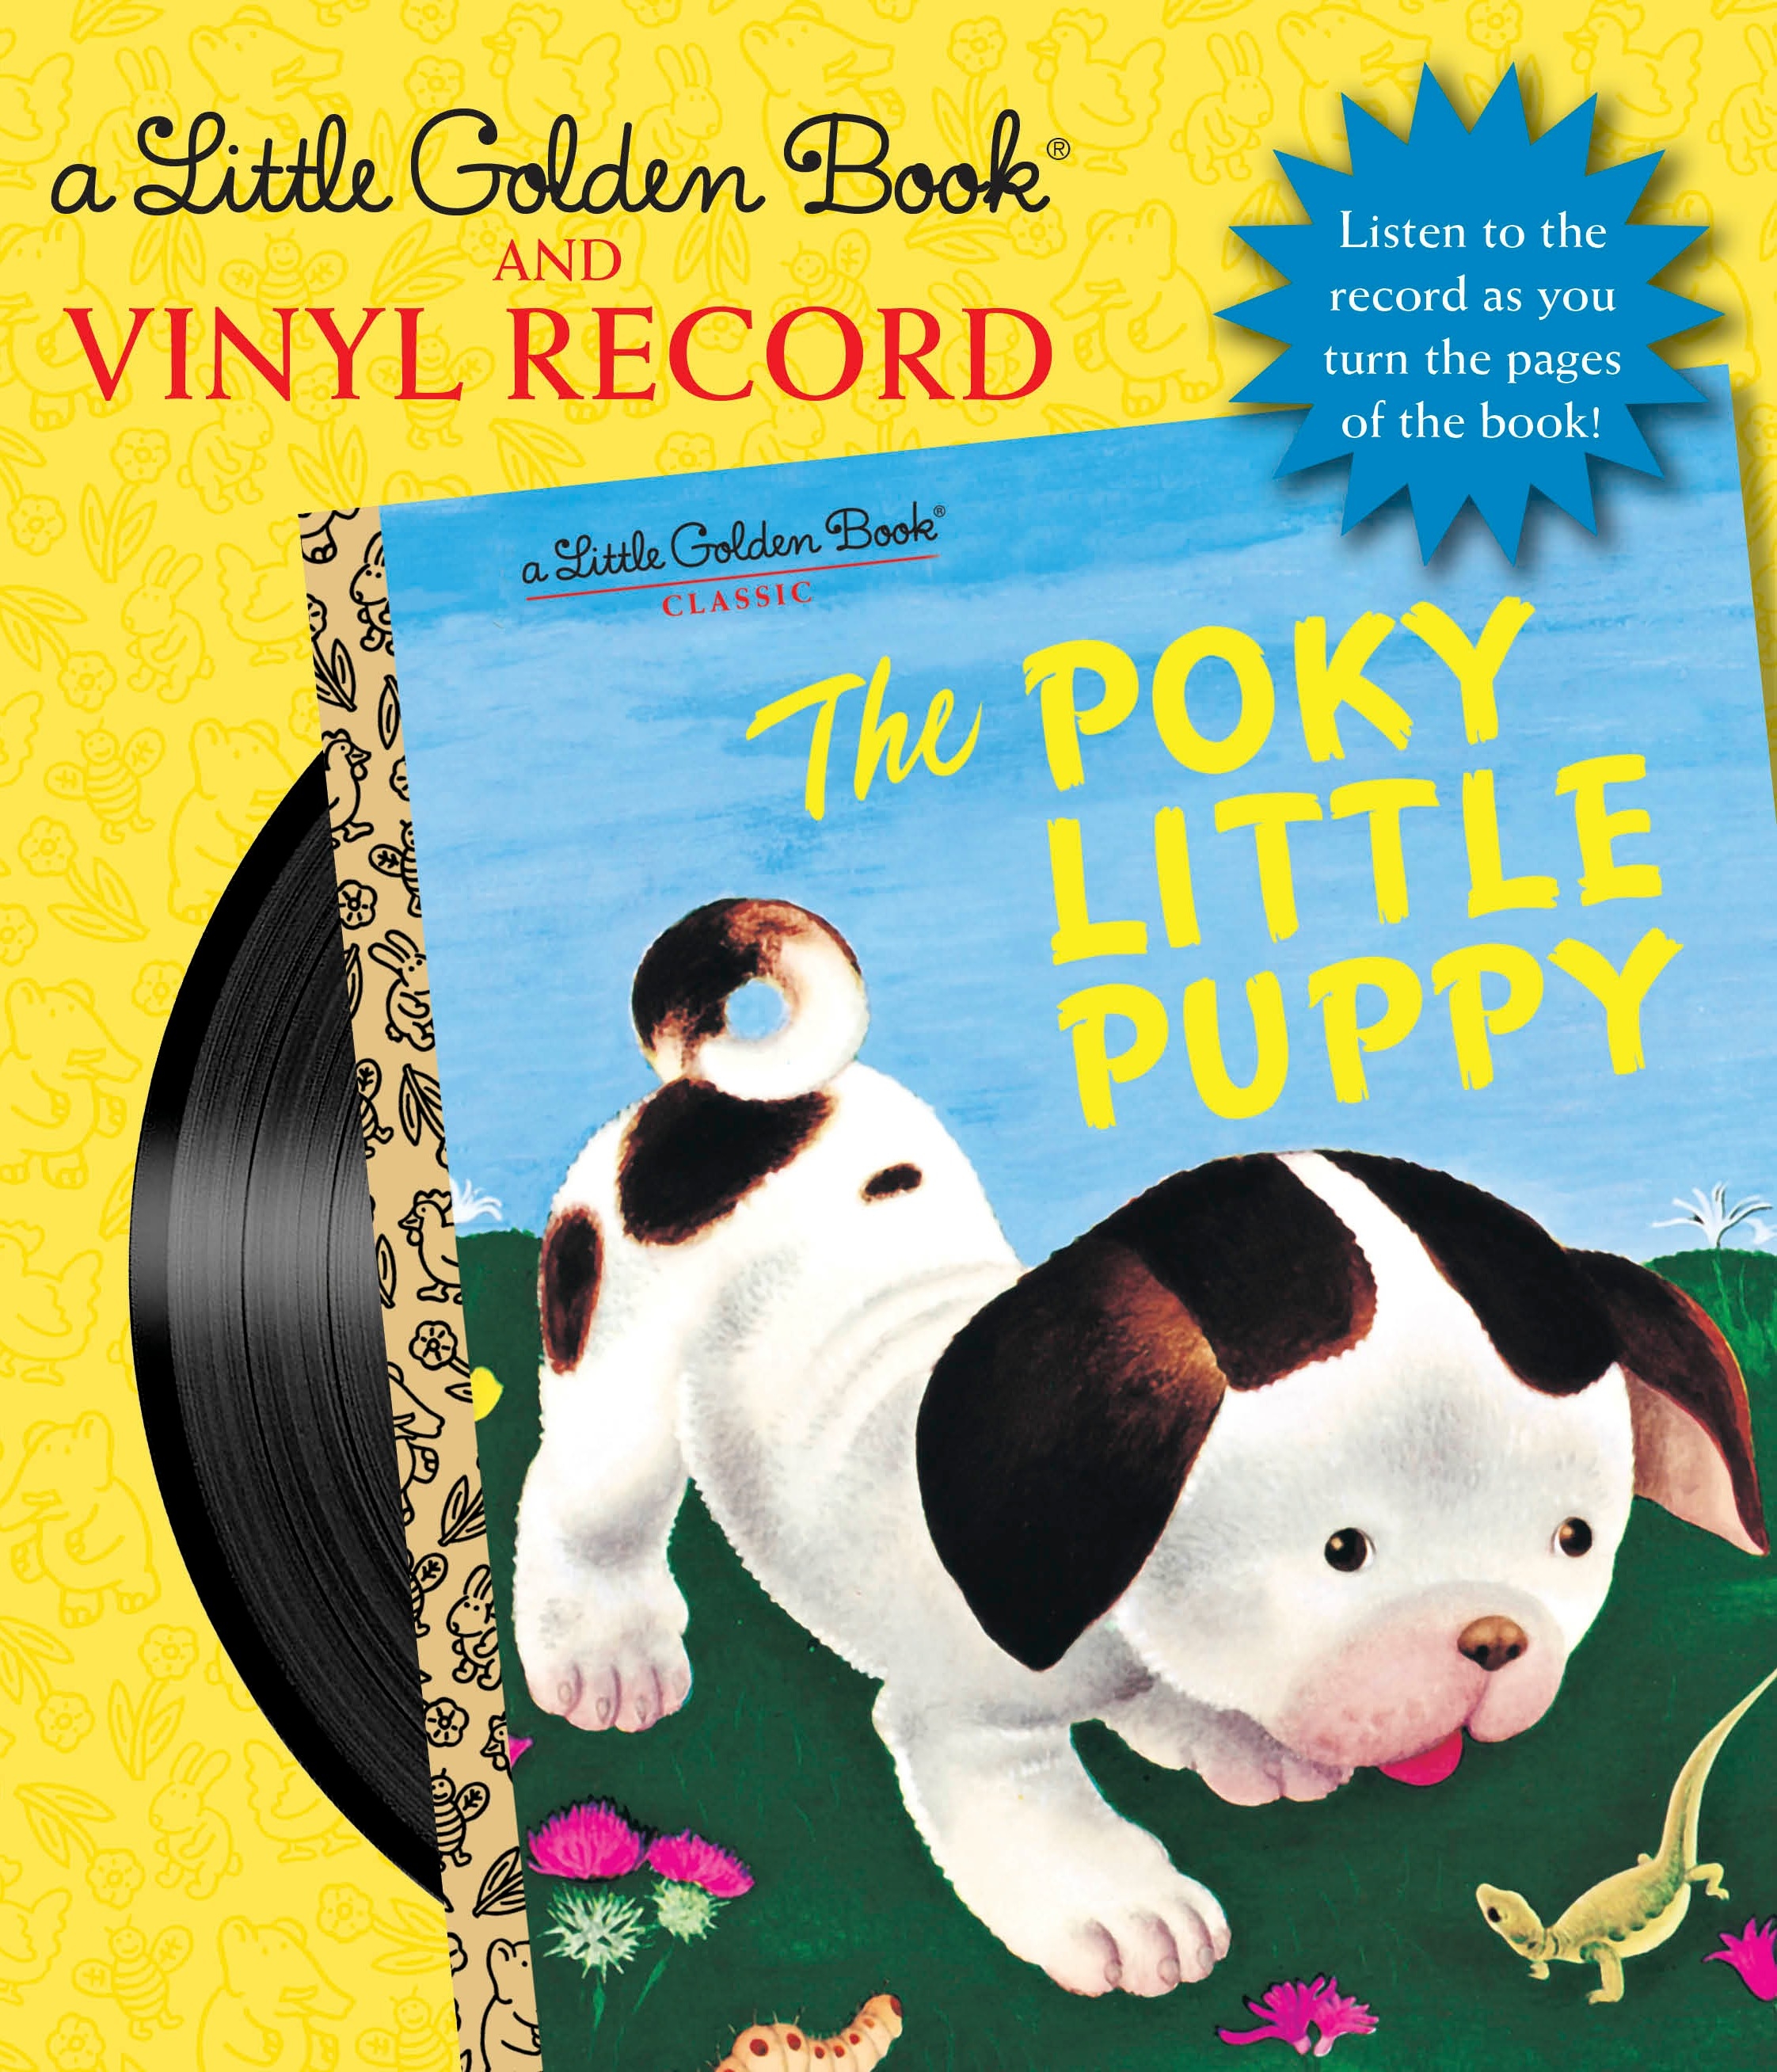 The Poky Little Puppy Book And Vinyl Record by